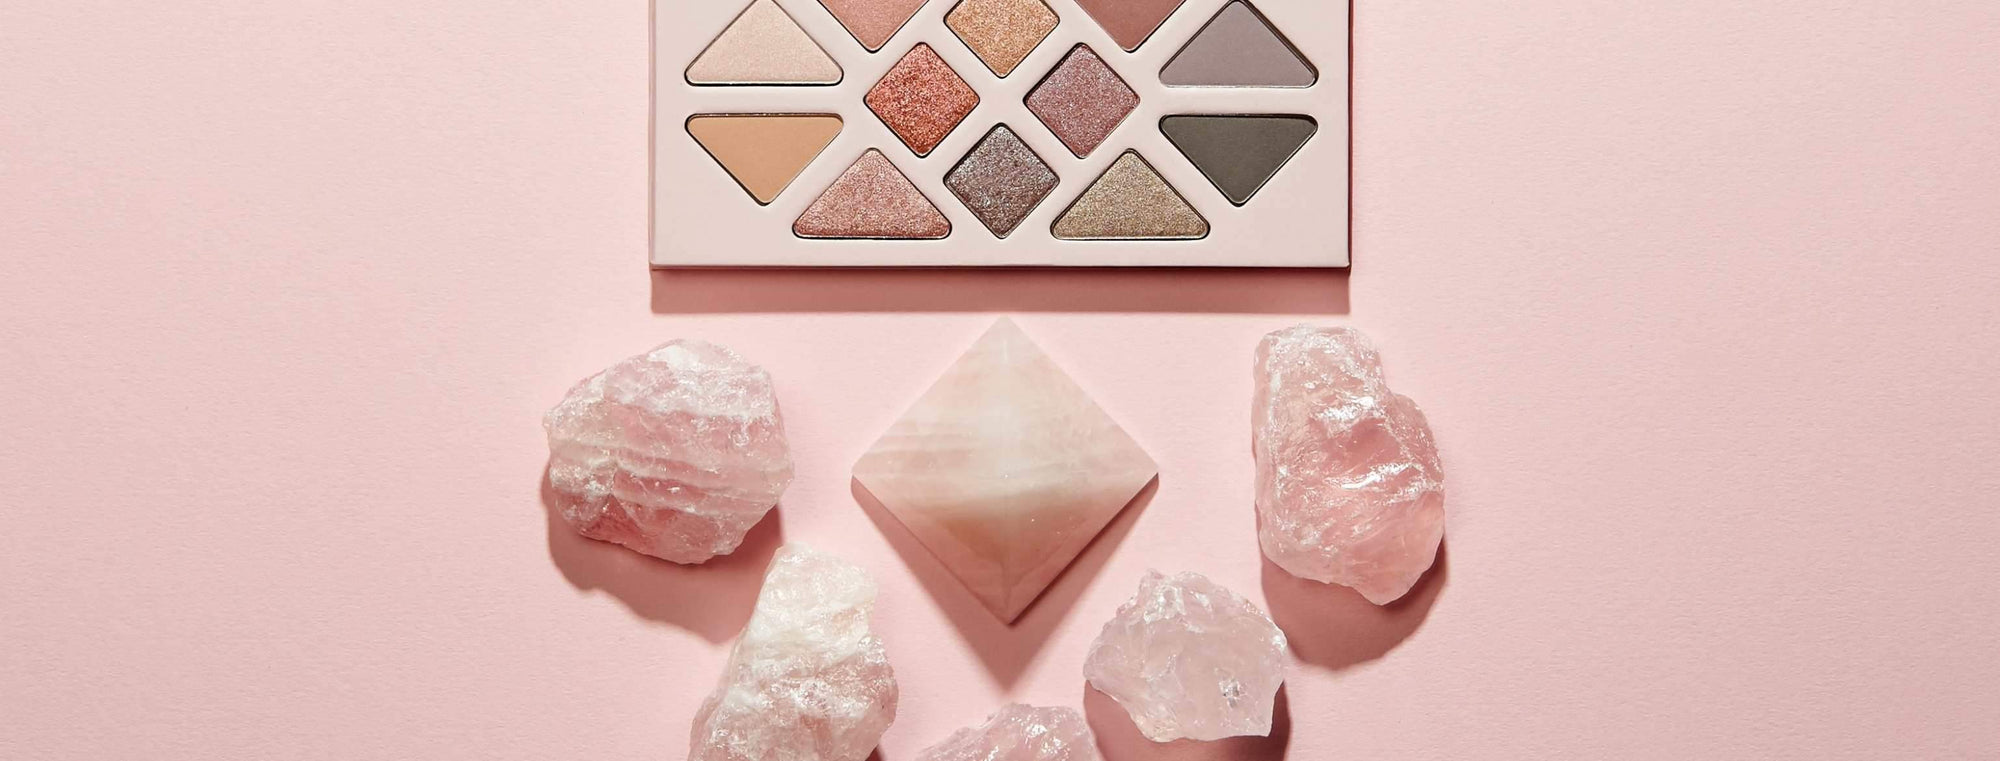 Athr Beauty makeup Palette stone crystals ethically produced makeup recyclable clean beauty australia Skincare Makeup Shop Online